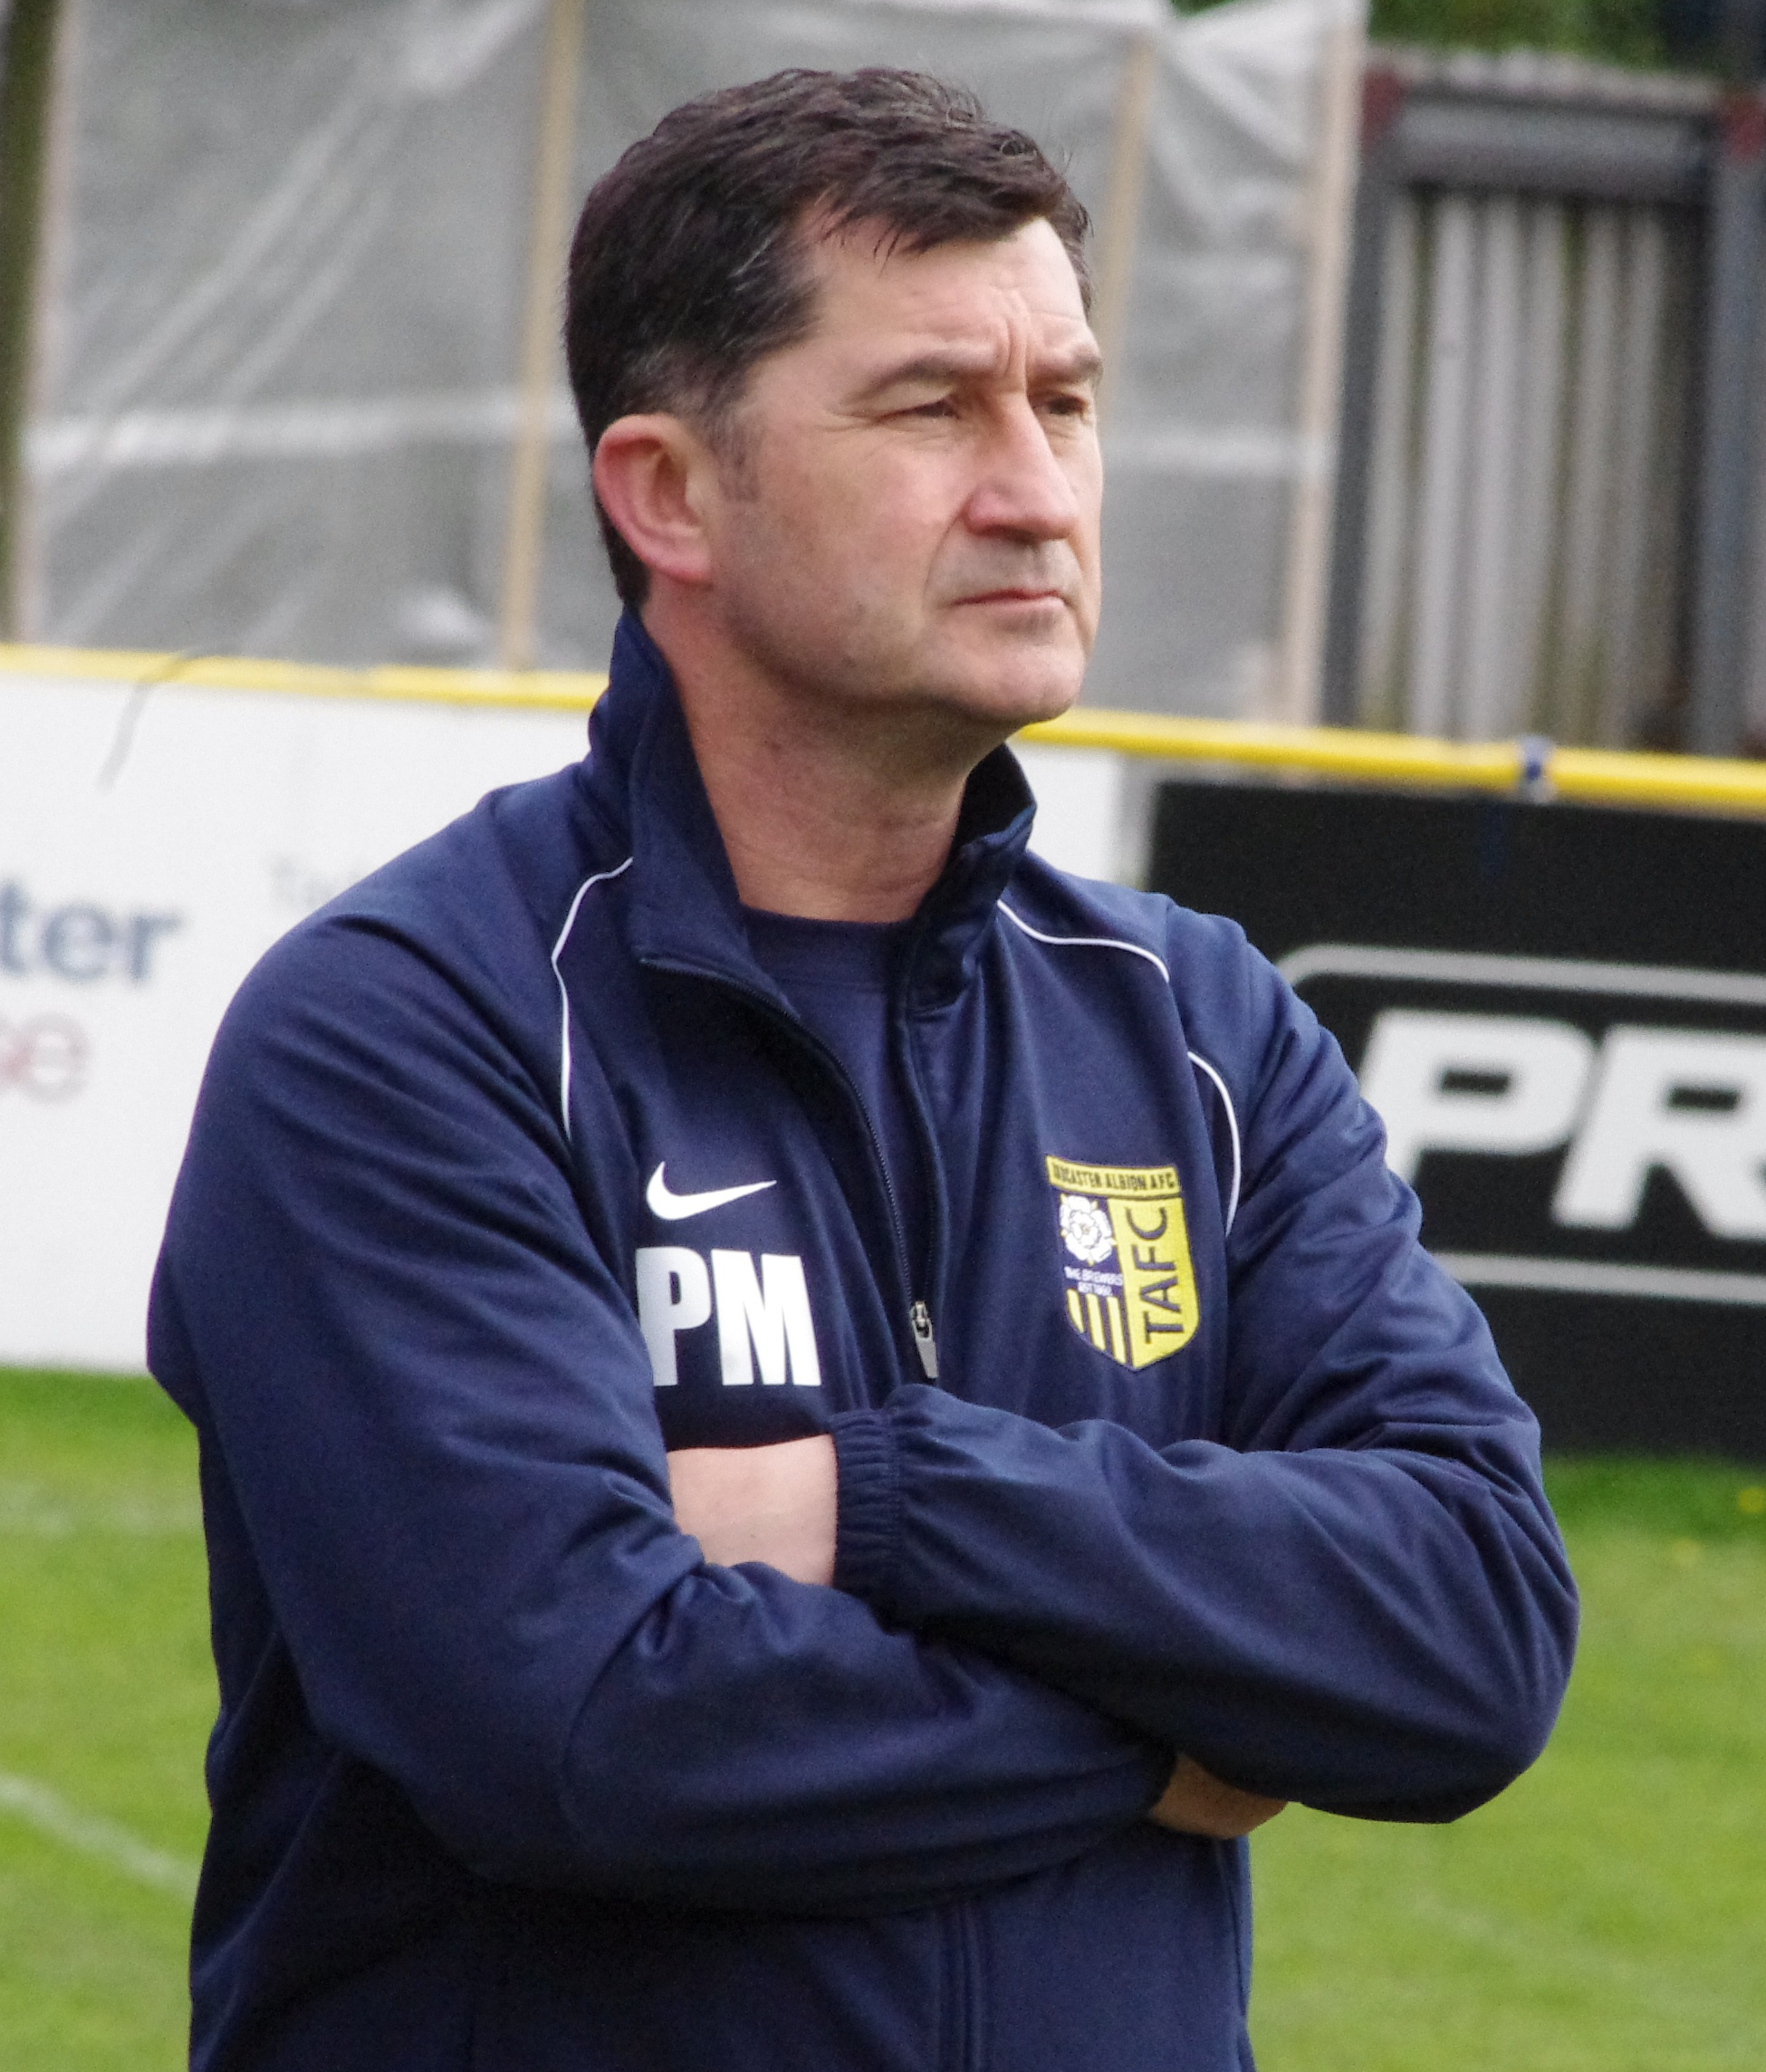 Tadcaster Albion boss Paul Marshall guided Harrogate Railway to the second round of the FA Cup in 2002 and the achievement remains of greatest ever involving a Non League team